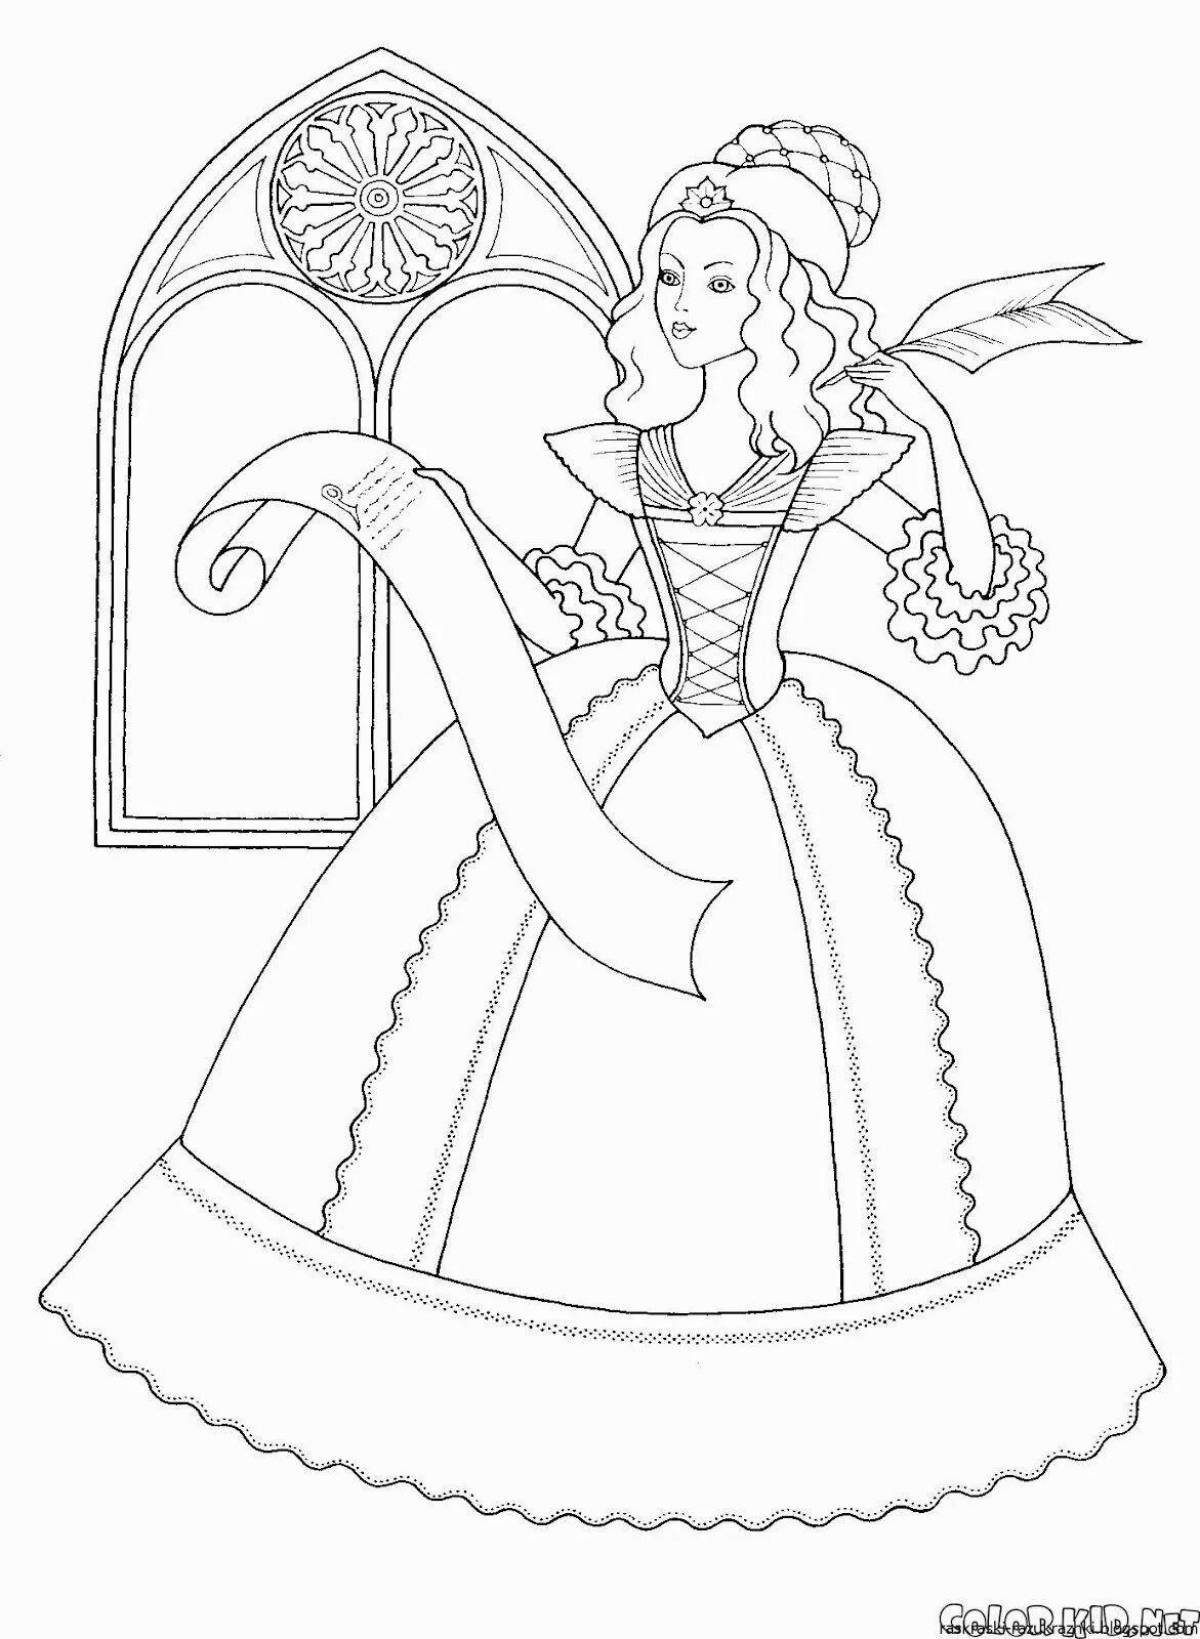 Colourful princess coloring pages for girls 6 years old